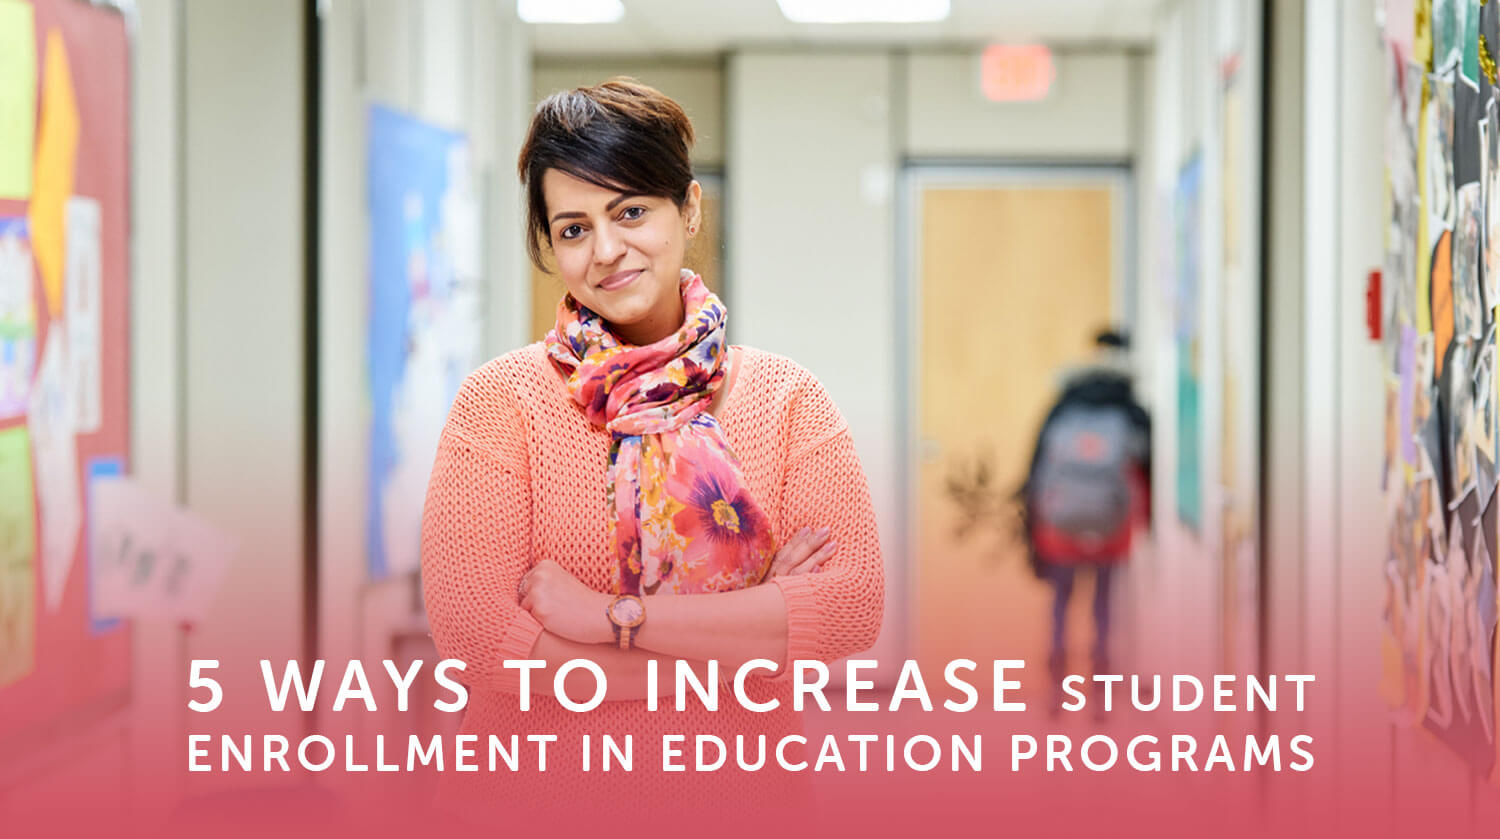 5 ways to increase student enrollment in education programs